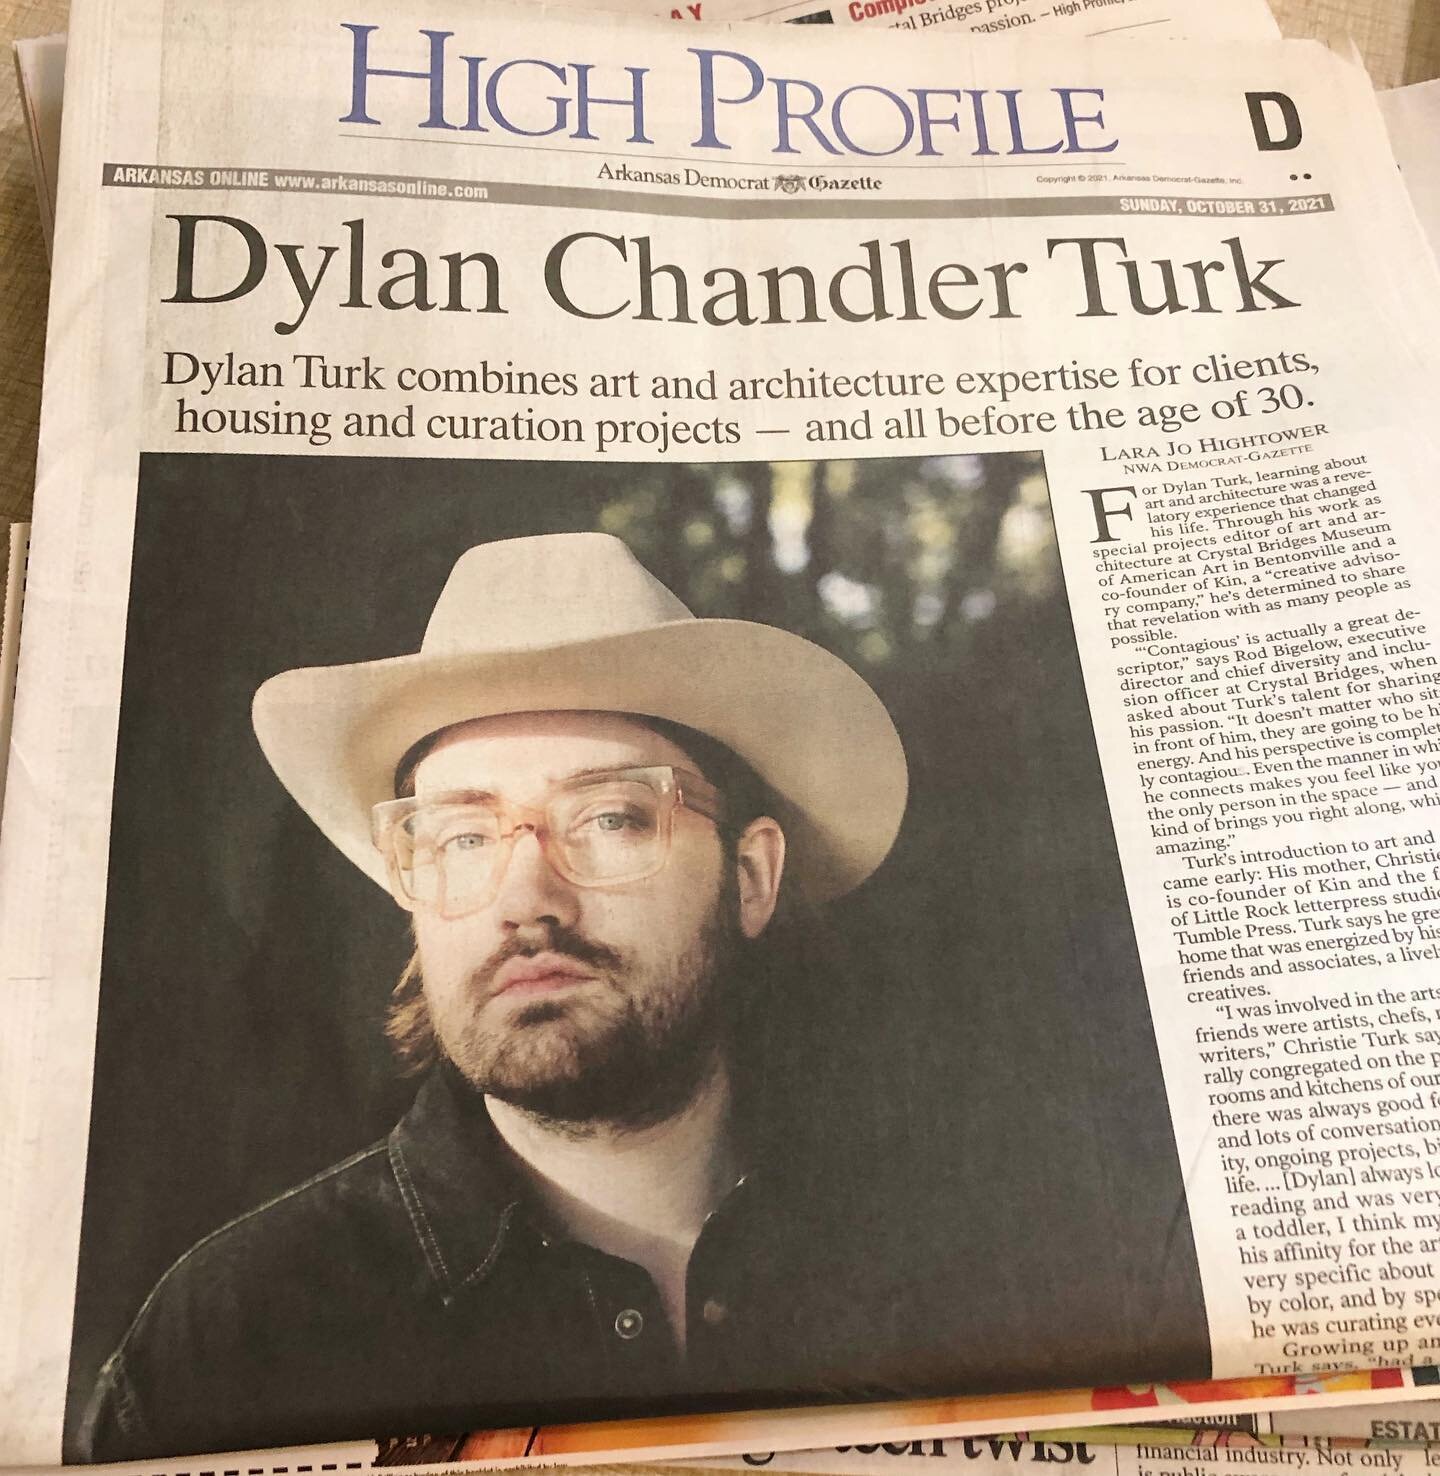 HIGH PROFILE: DYLAN CHANDLER TURK 

If you missed yesterday&rsquo;s Arkansas Democrat-Gazette our Co-Founder @dylanturk was featured. Give it a read to learn a little bit more about why and how we got started, and the philosophies that drive what we 